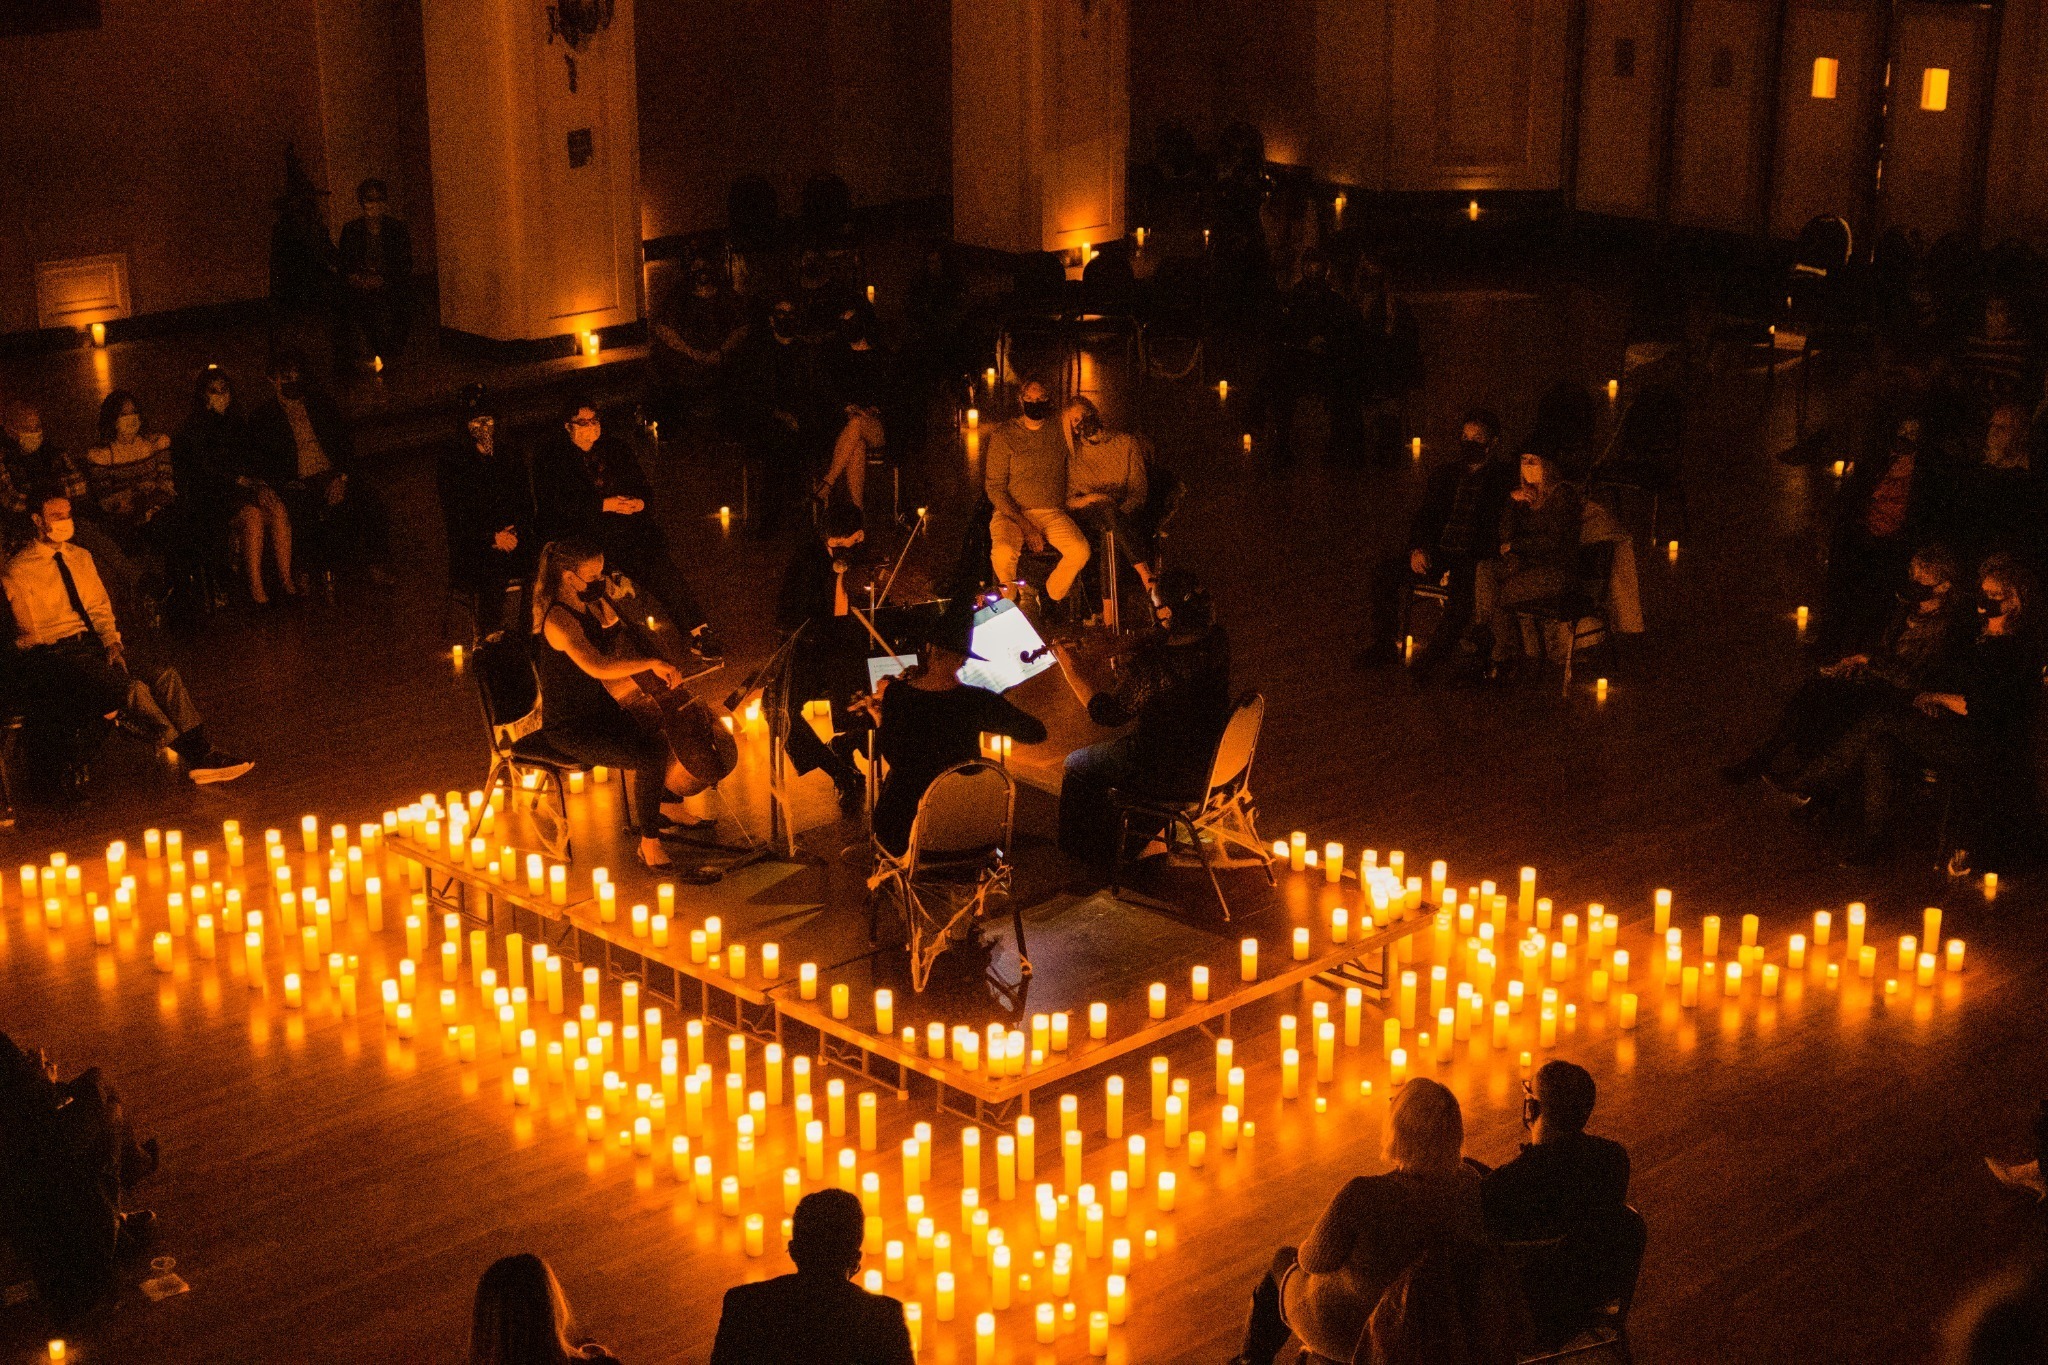 Take In An Atmospheric Candlelight Concert At A Luxurious Long Beach